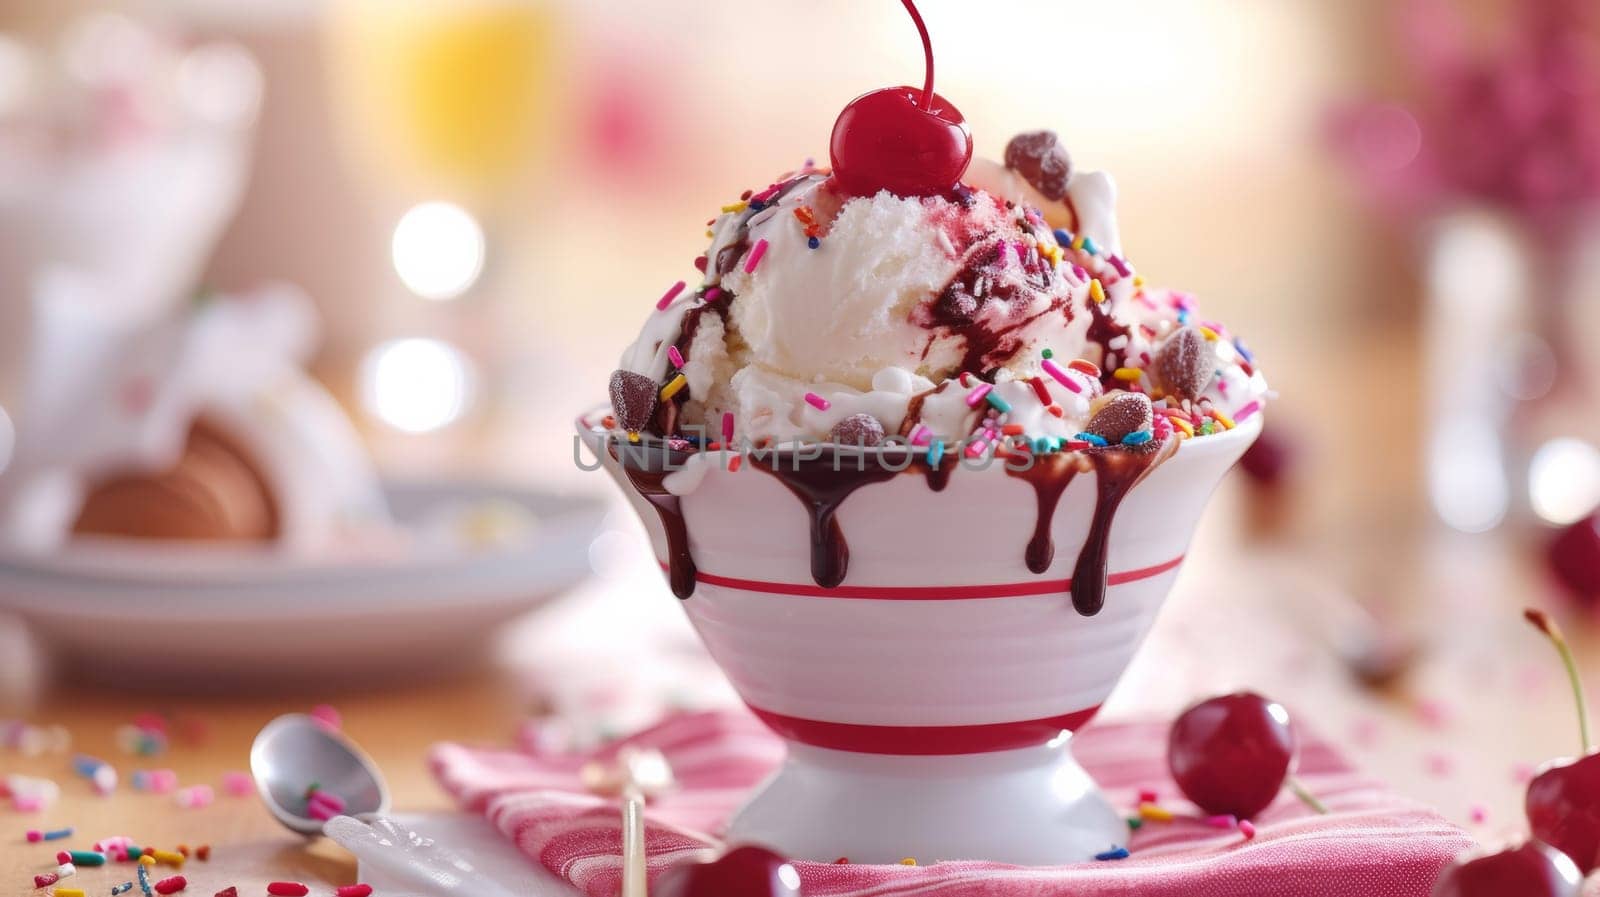 A bowl of ice cream with sprinkles and cherries on top, AI by starush